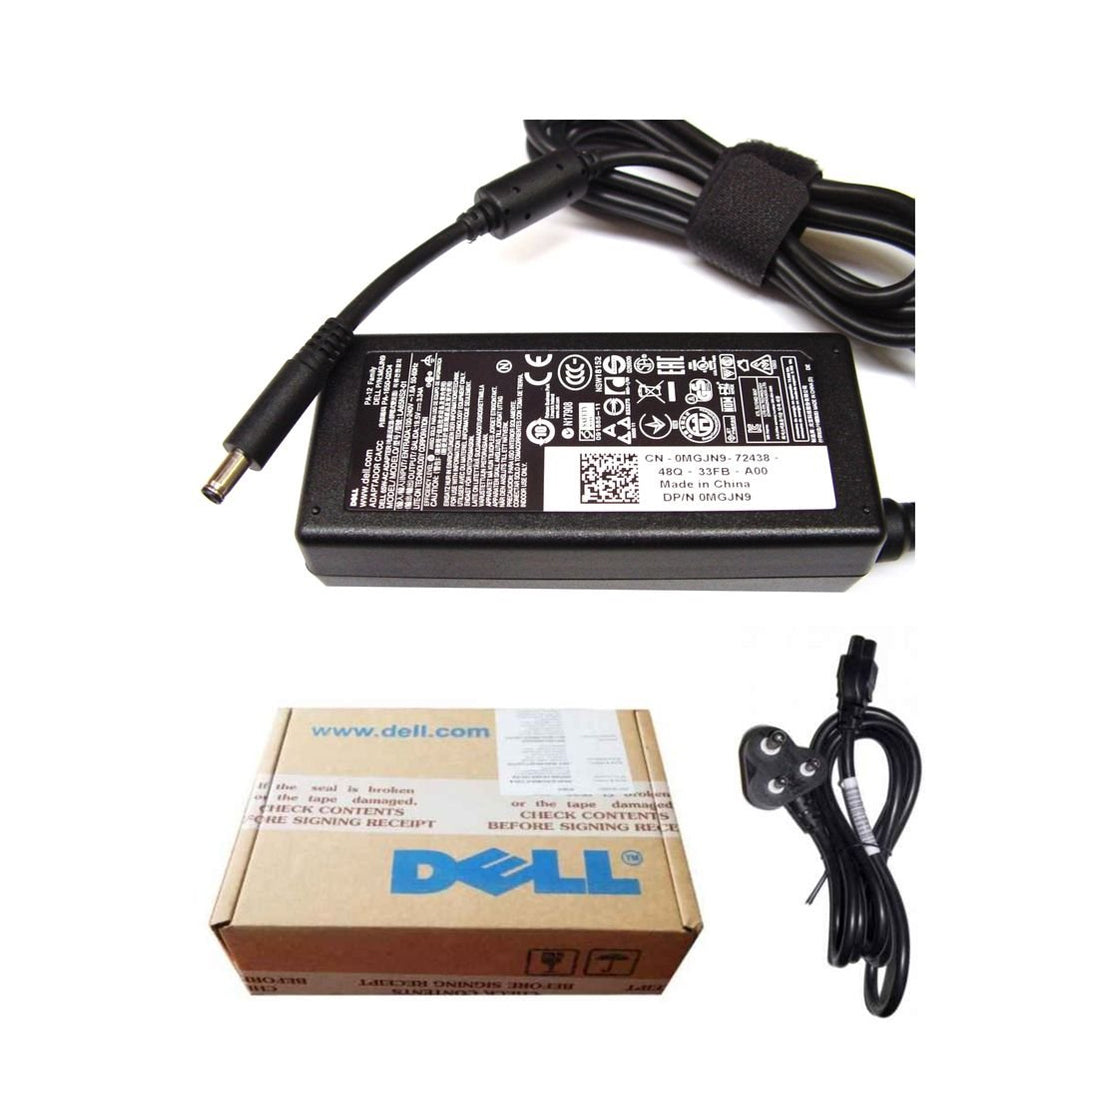 Dell Original 65W 19.5V 4.5mm Pin Laptop Charger Adapter for Inspiron 15 5575 With Power Cord